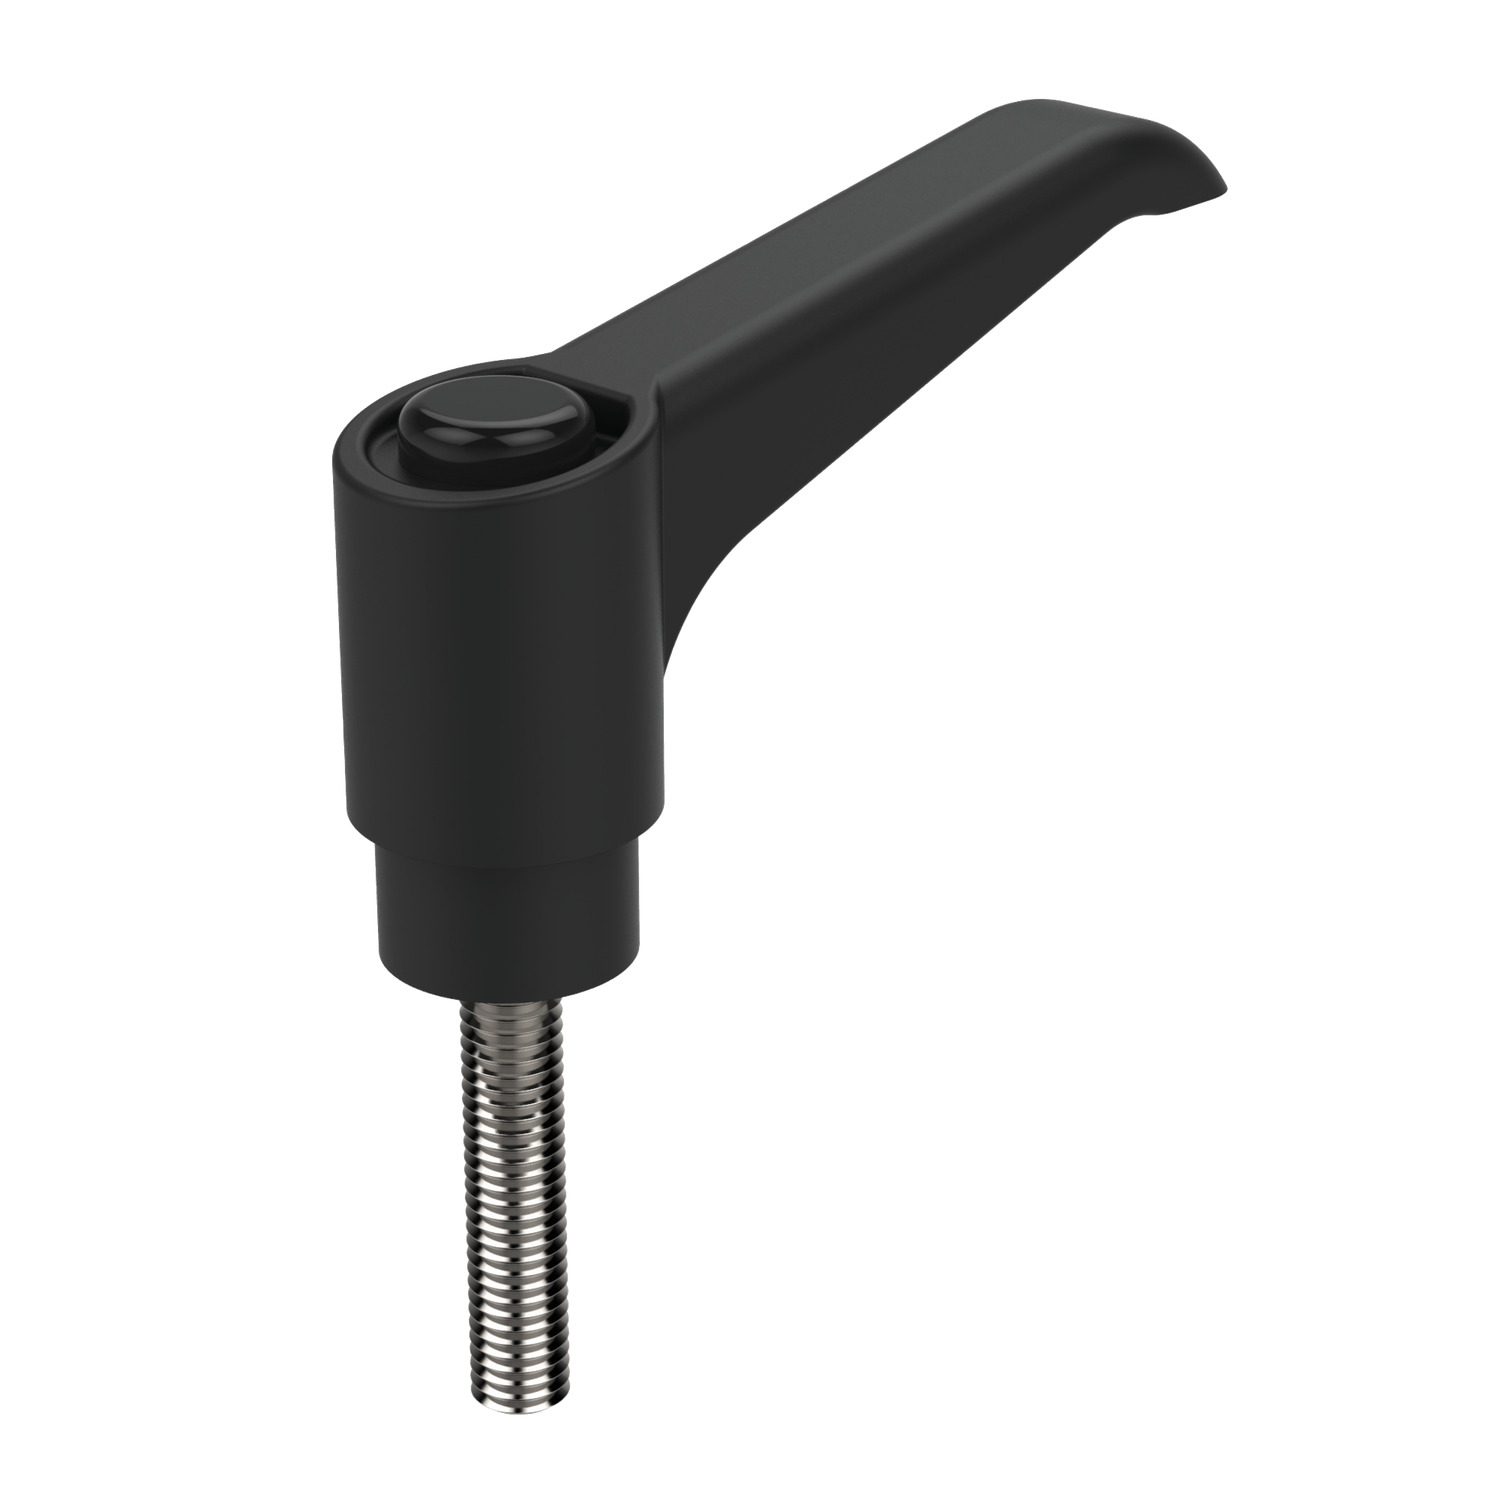 Product 74780, Adjustable Clamping Levers with grub screw / 